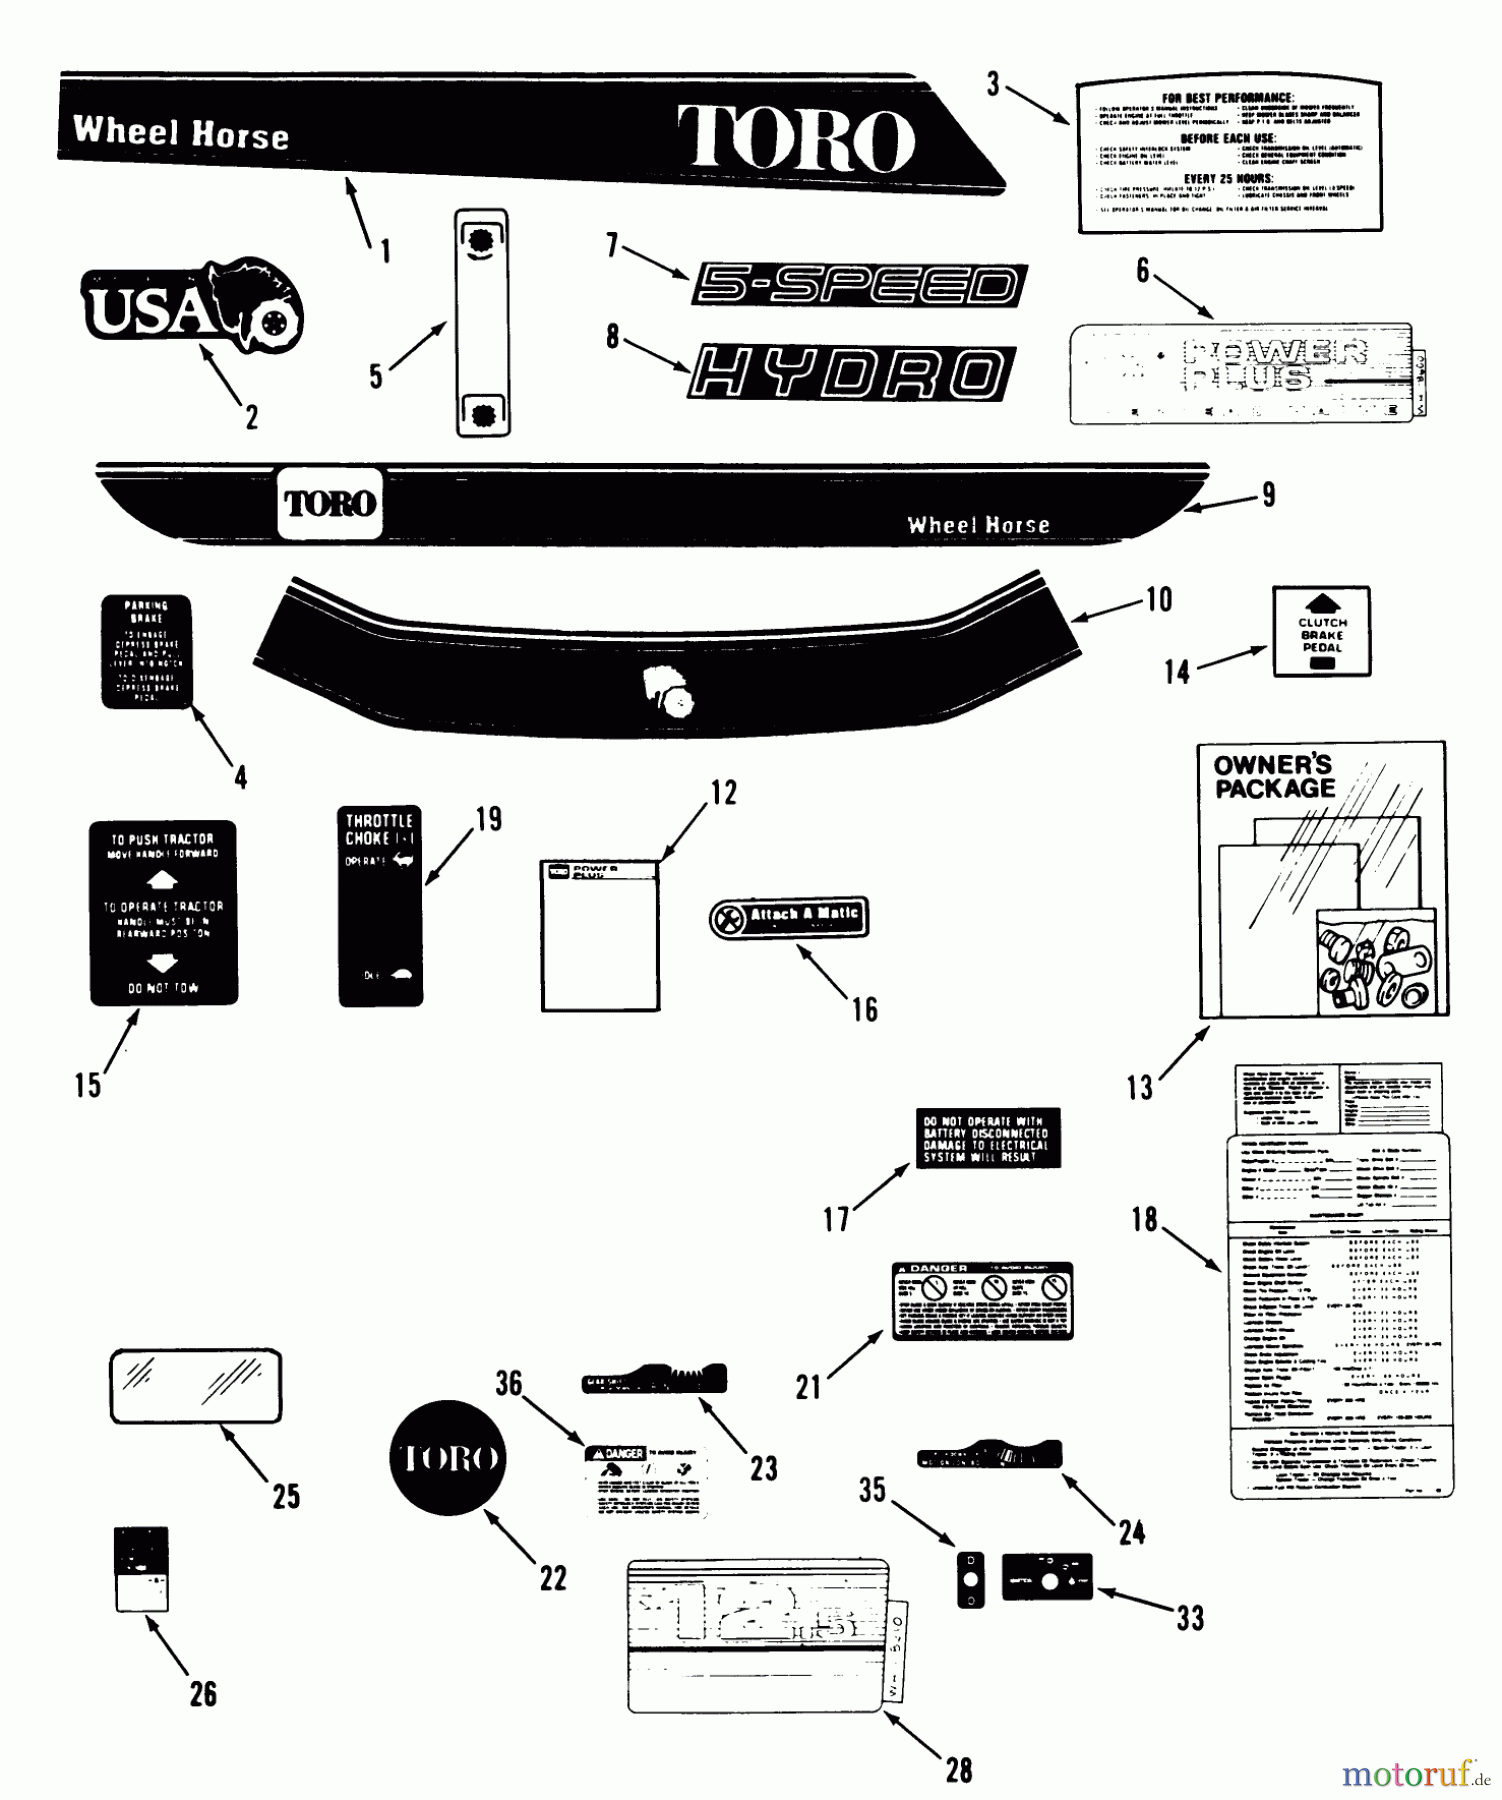  Toro Neu Mowers, Lawn & Garden Tractor Seite 1 32-10BE03 (210-H) - Toro 210-H Tractor, 1992 (2000001-2999999) DECAL & MISCELLANEOUS PARTS ASSEMBLY